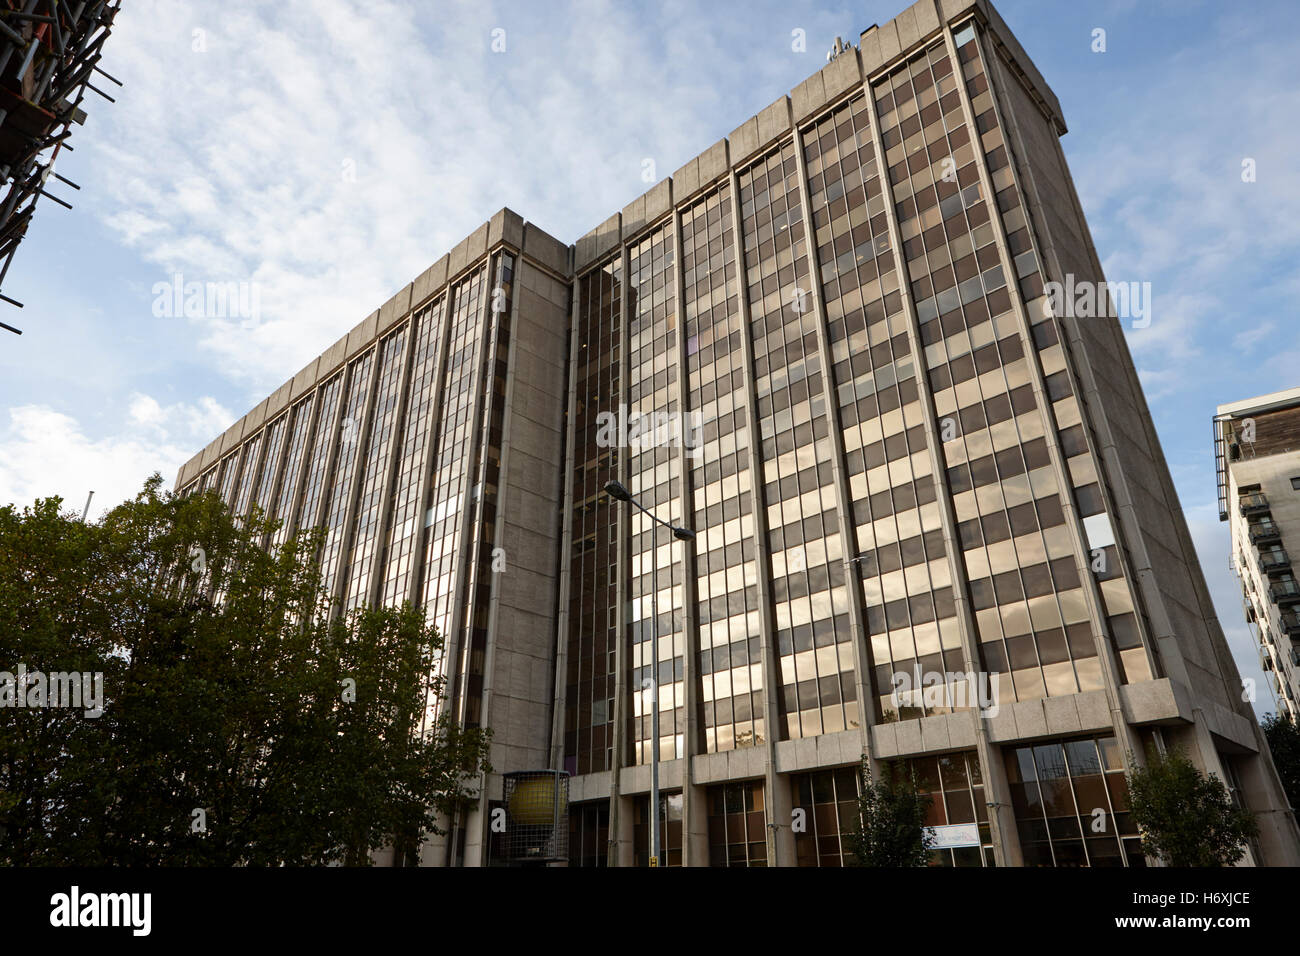 brunel house office building home to hmrc amongst others Cardiff Wales United Kingdom Stock Photo